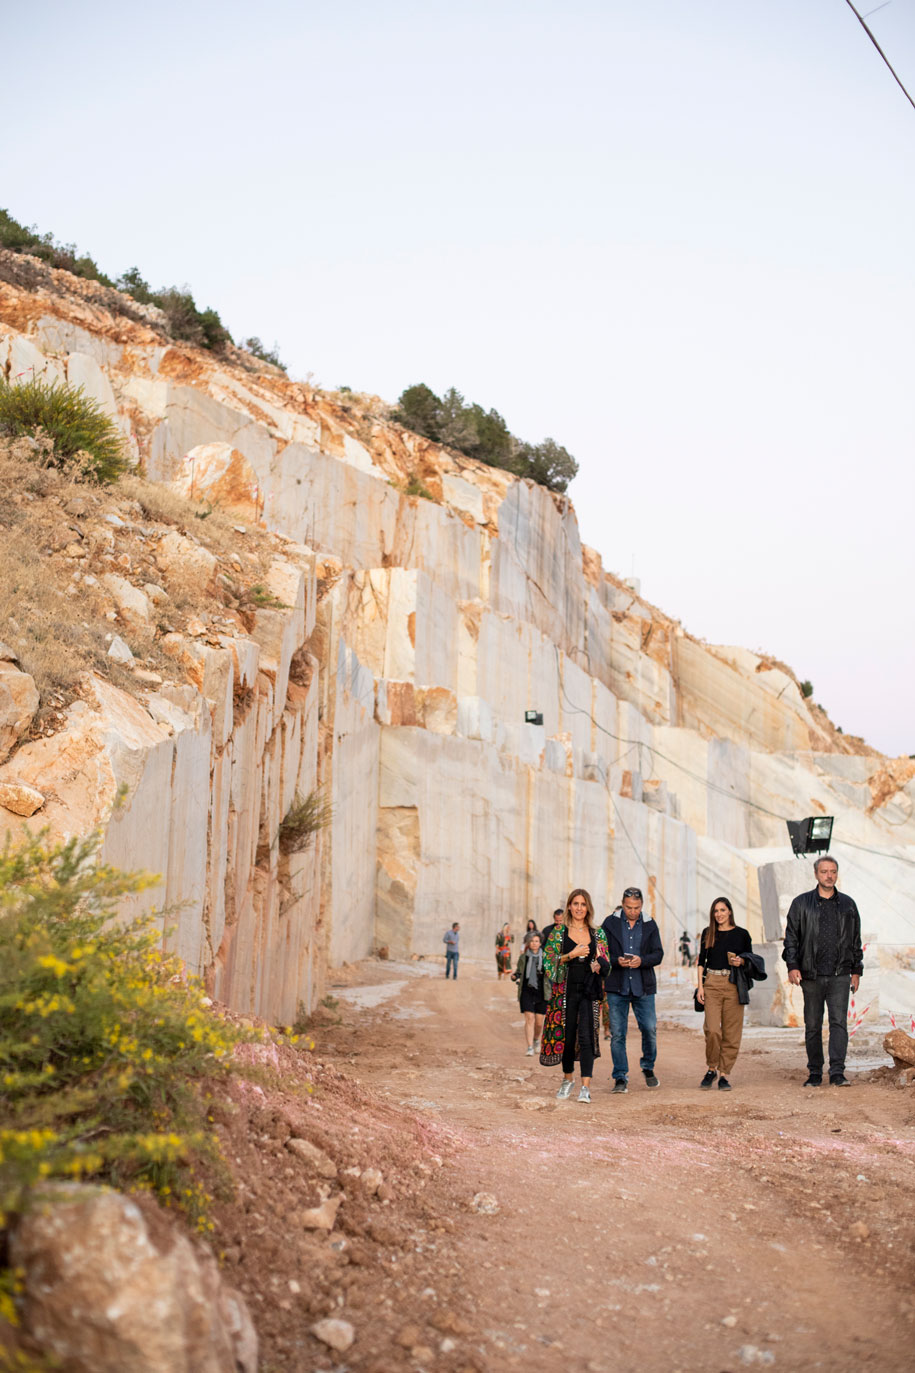 Archisearch Man on the Moon Volume 2: Architects' weekend at the Didima quarry of Marmyk Iliopoulos